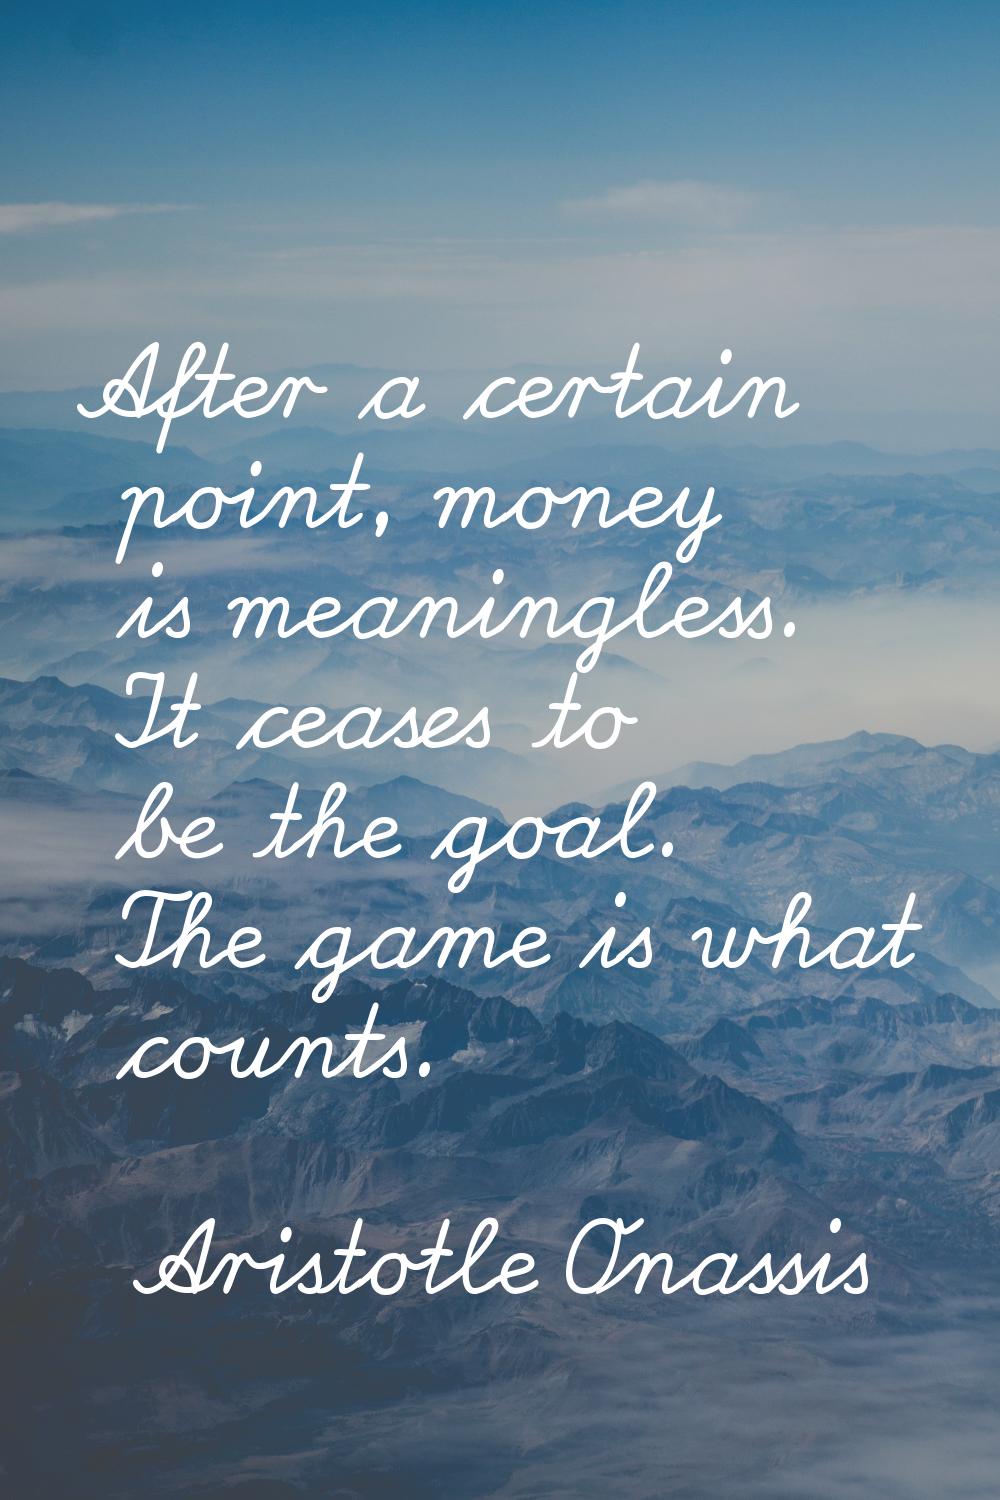 After a certain point, money is meaningless. It ceases to be the goal. The game is what counts.